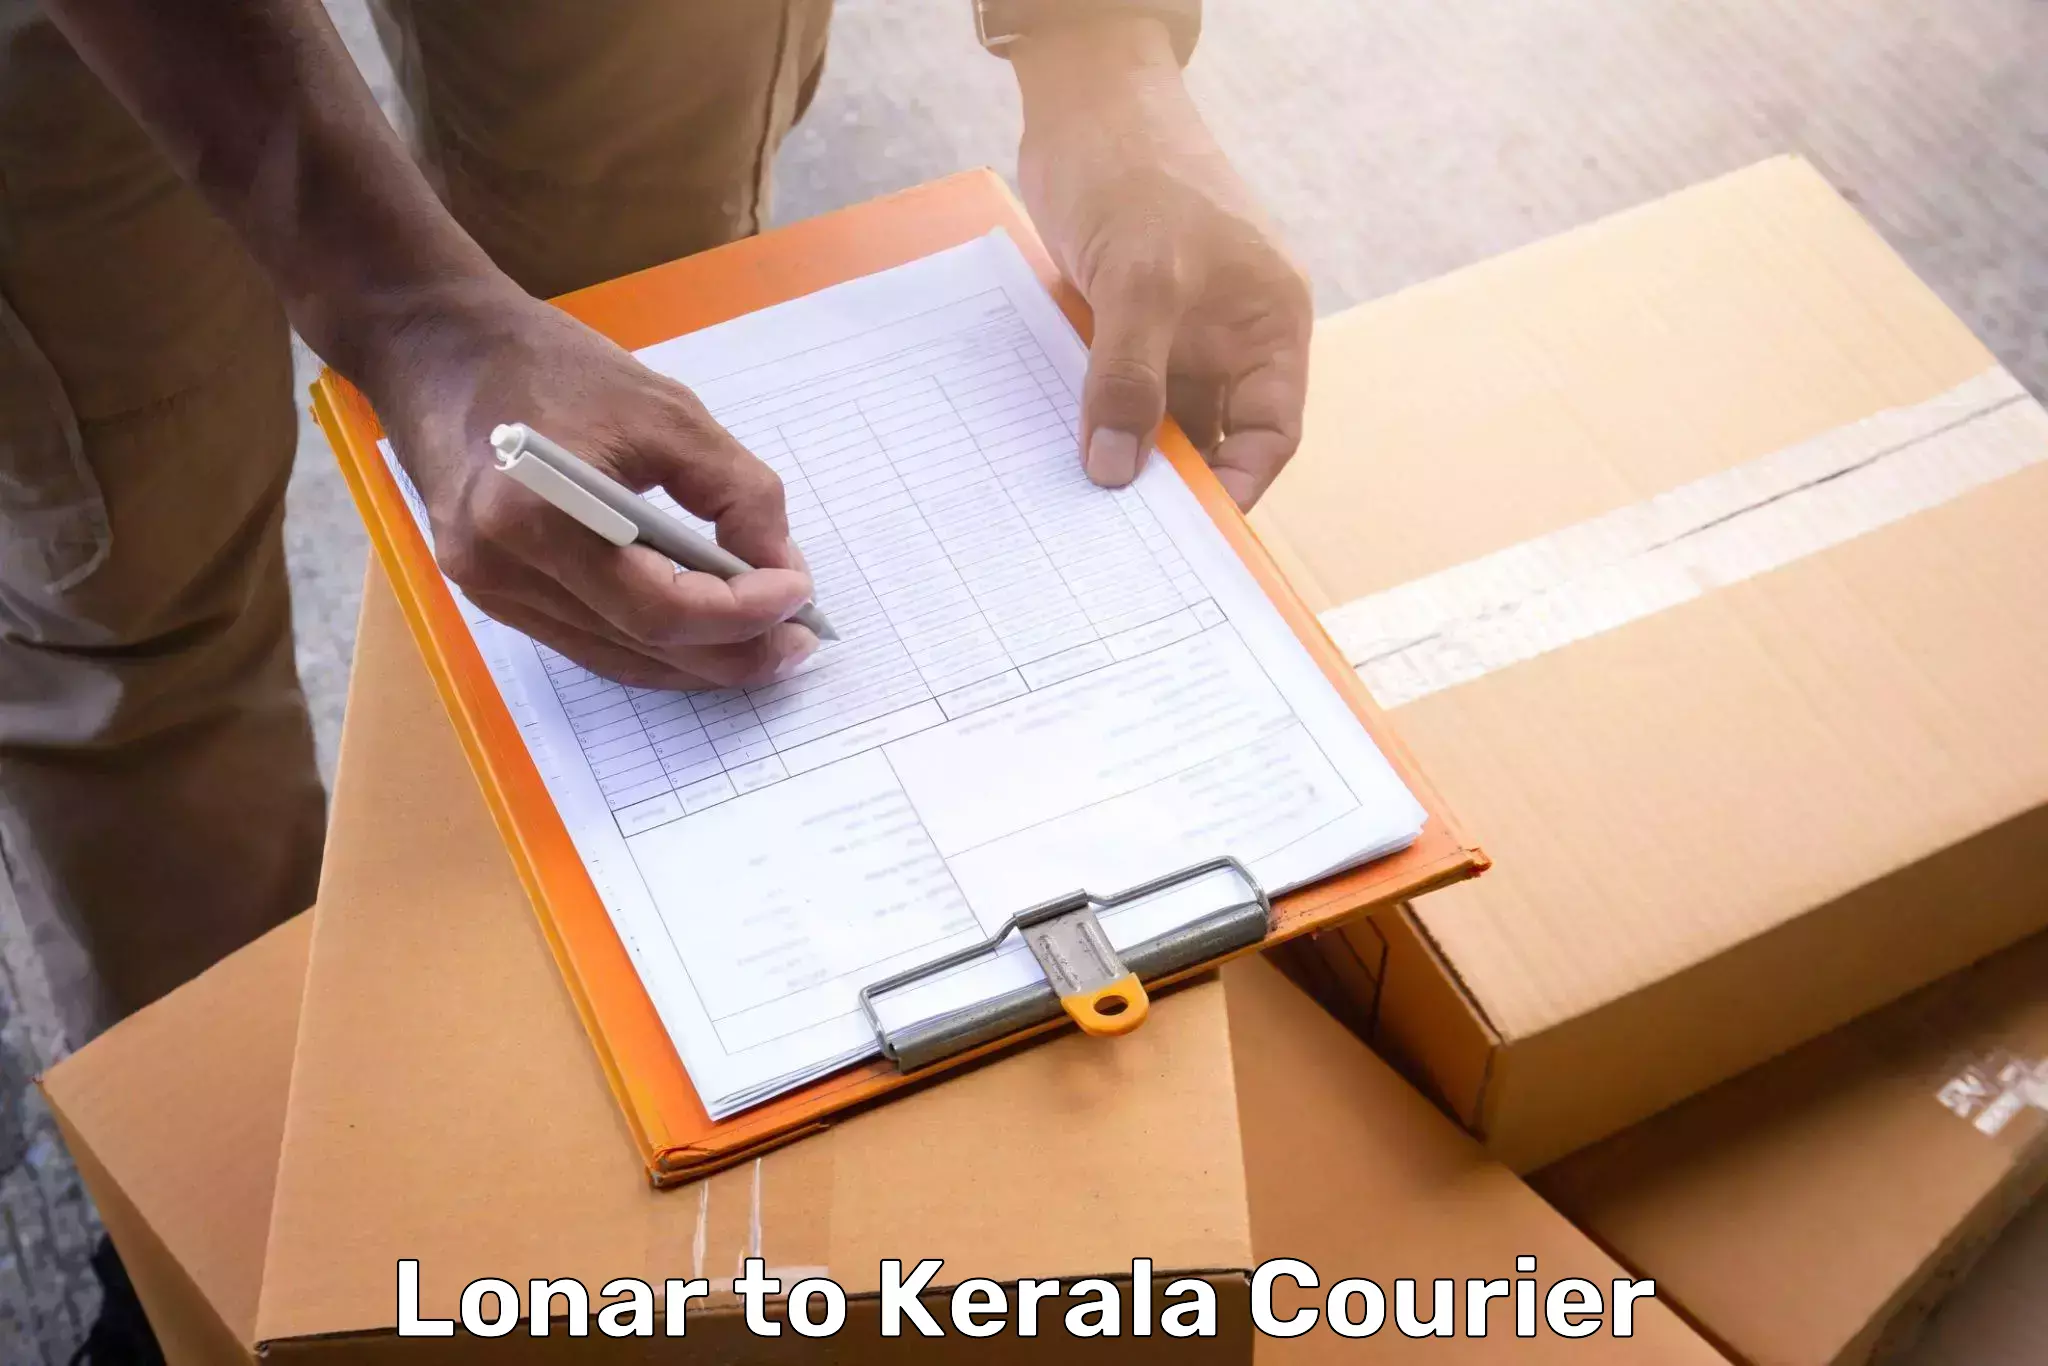 Instant baggage transport quote Lonar to Payyanur